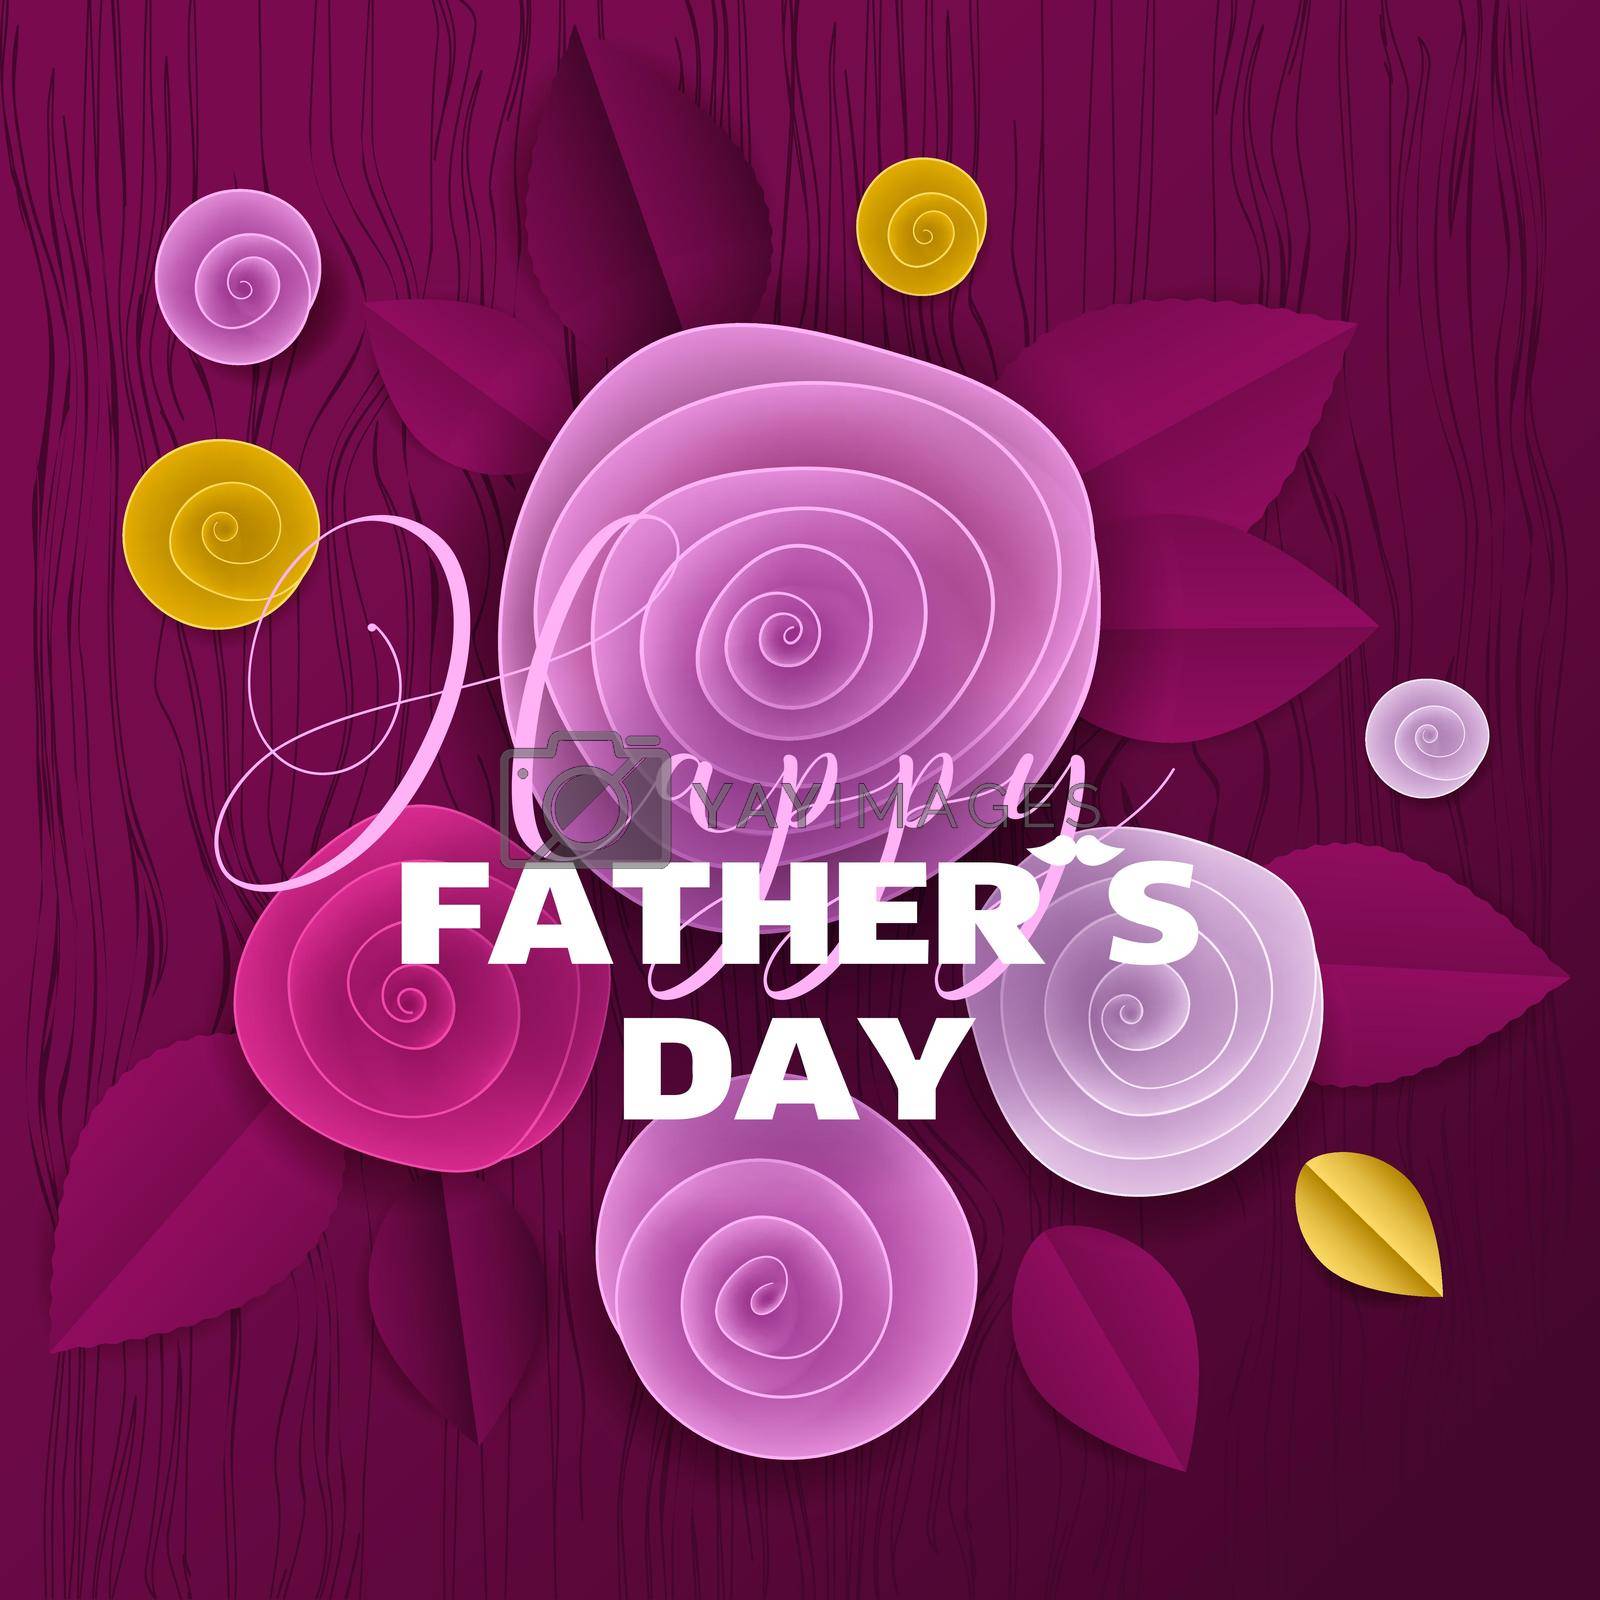 Royalty free image of Cut paper floral card Fathers Day by Xeniasnowstorm